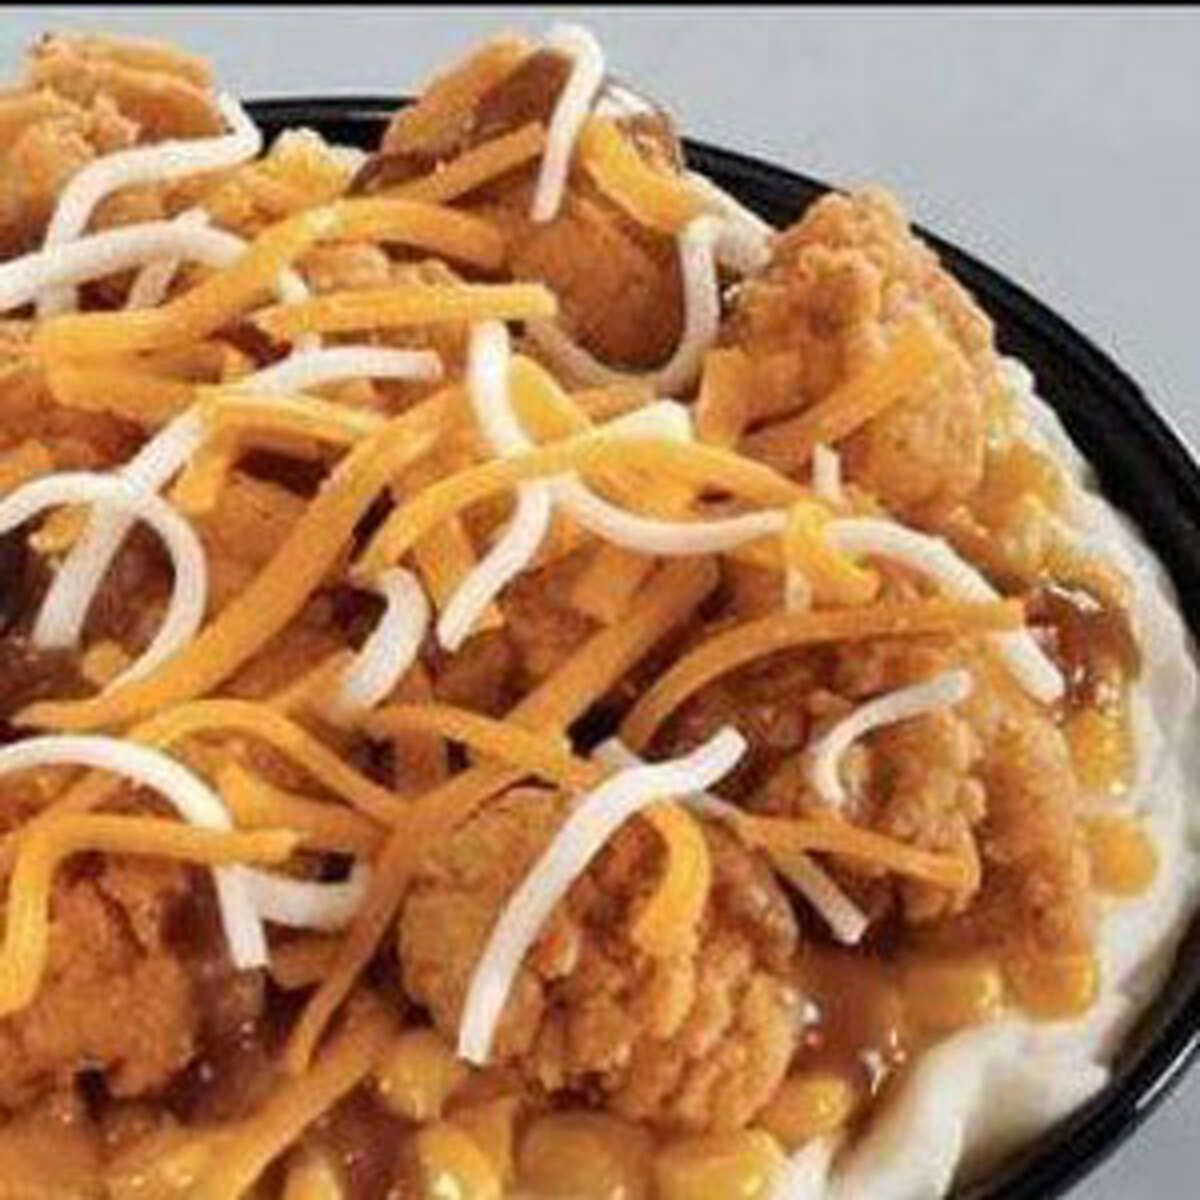 This is the KFC Hot Pocket Bowl.